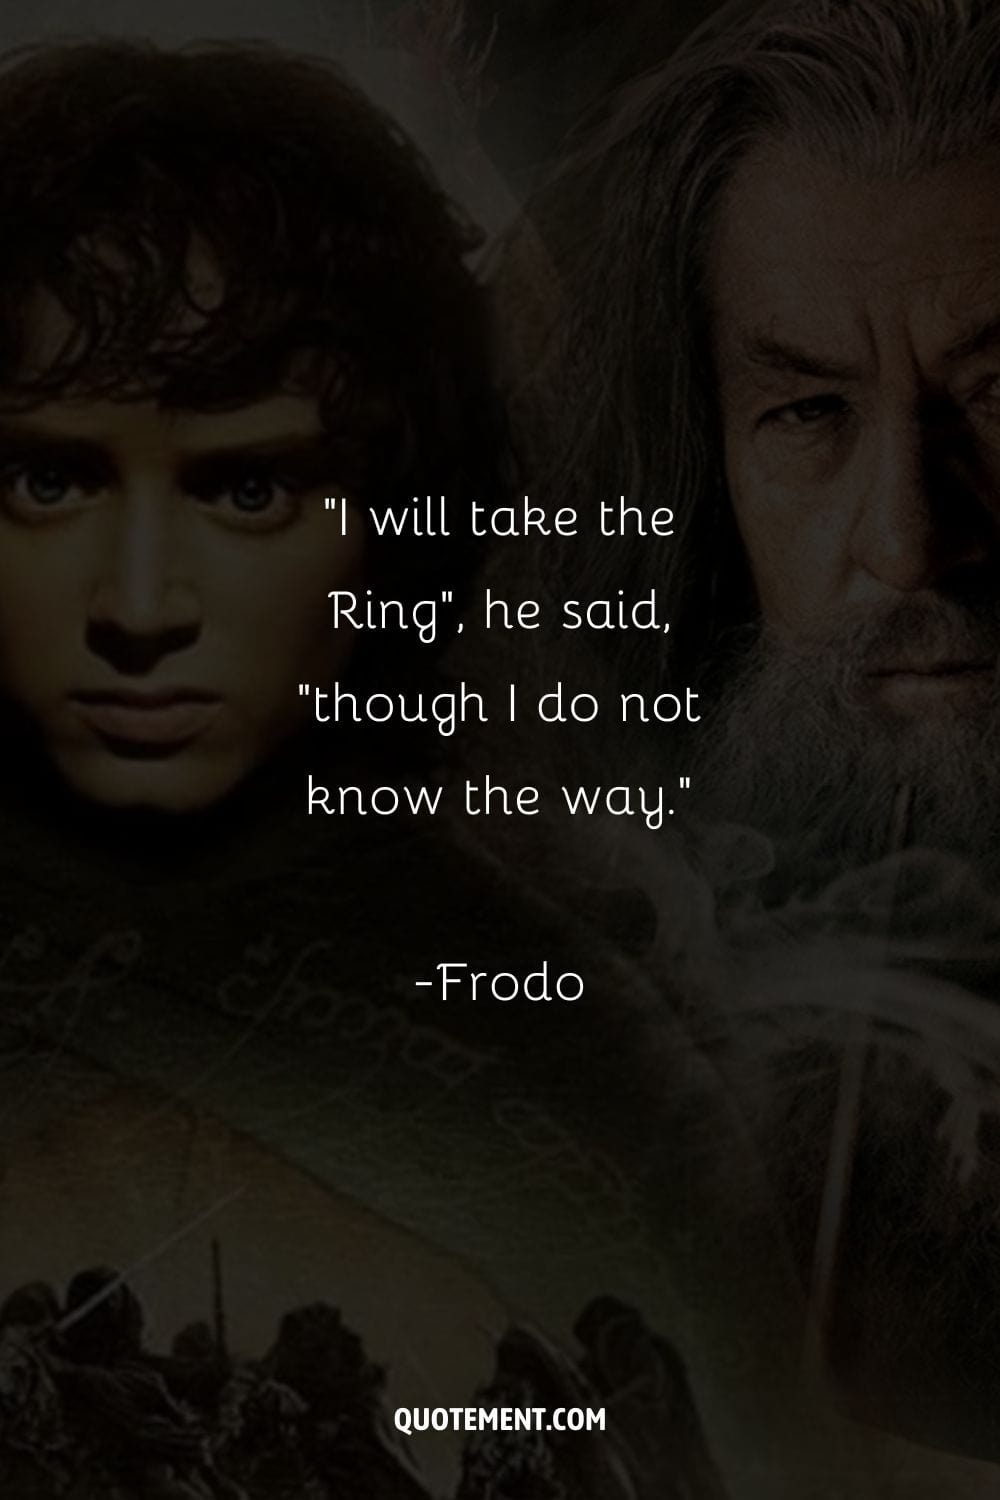 I will take the Ring, he said, though I do not know the way.